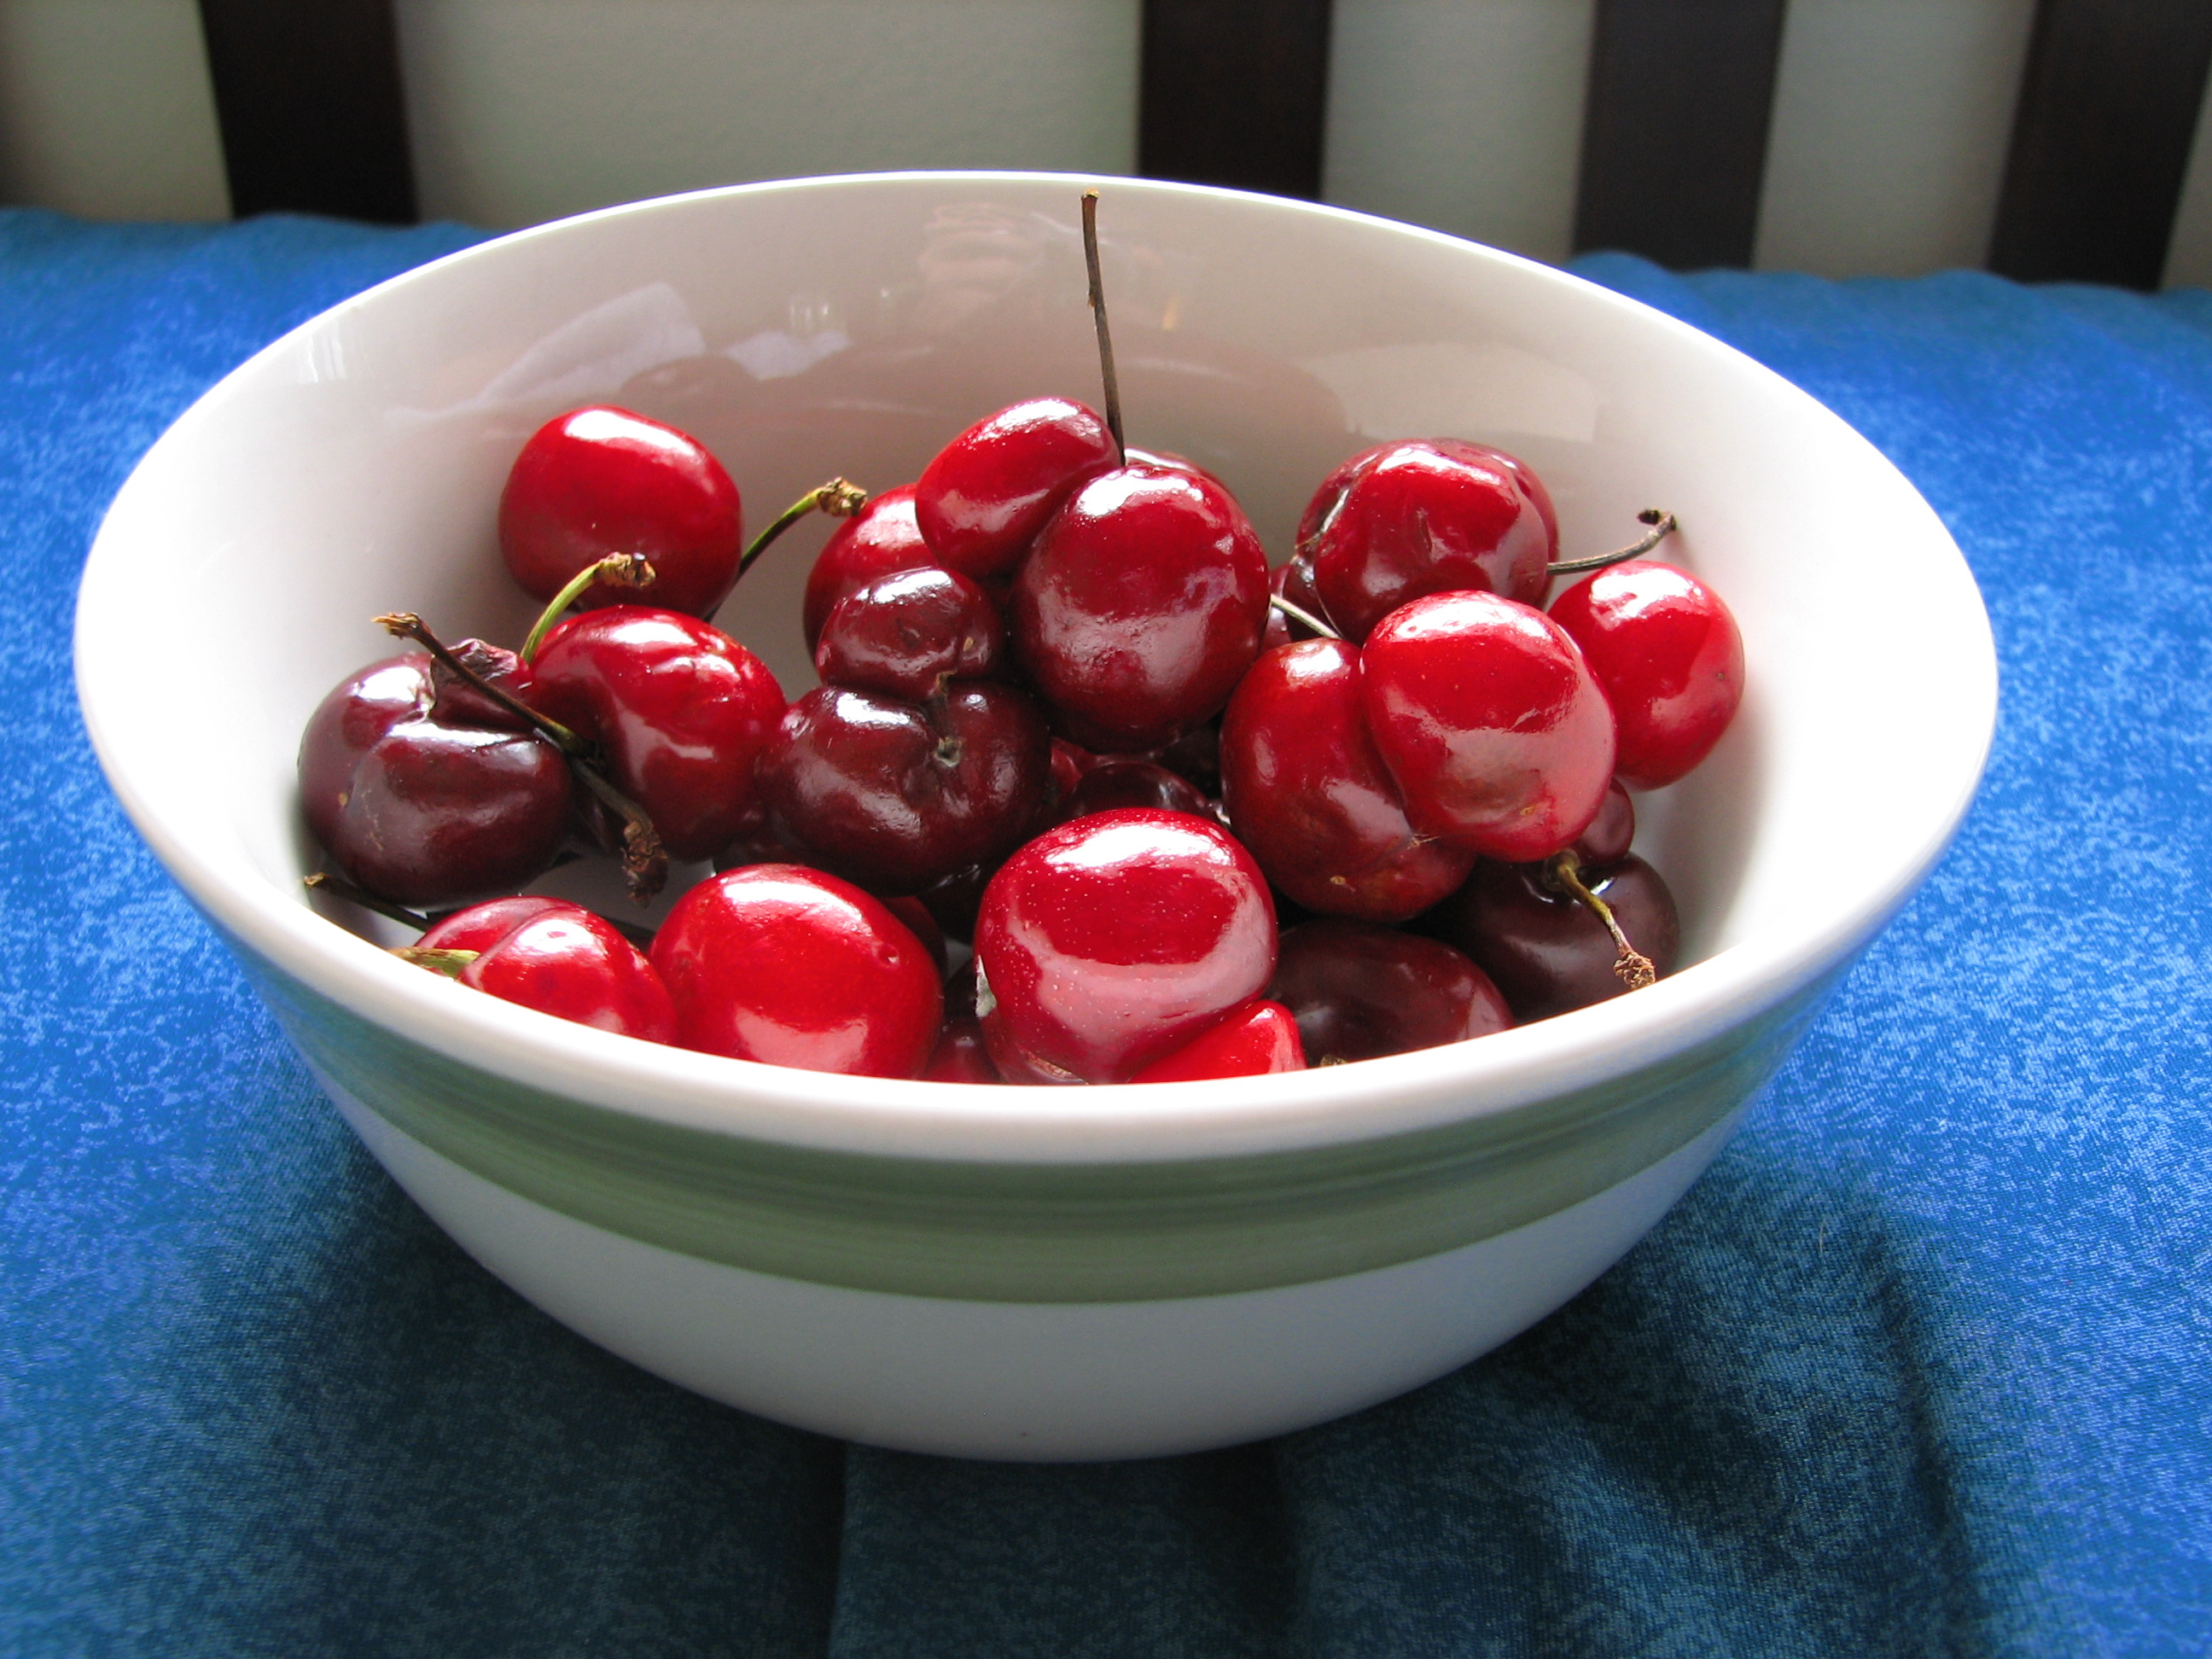 File:Bowl of cherries with colours enhanced.jpg - Wikimedia Commons